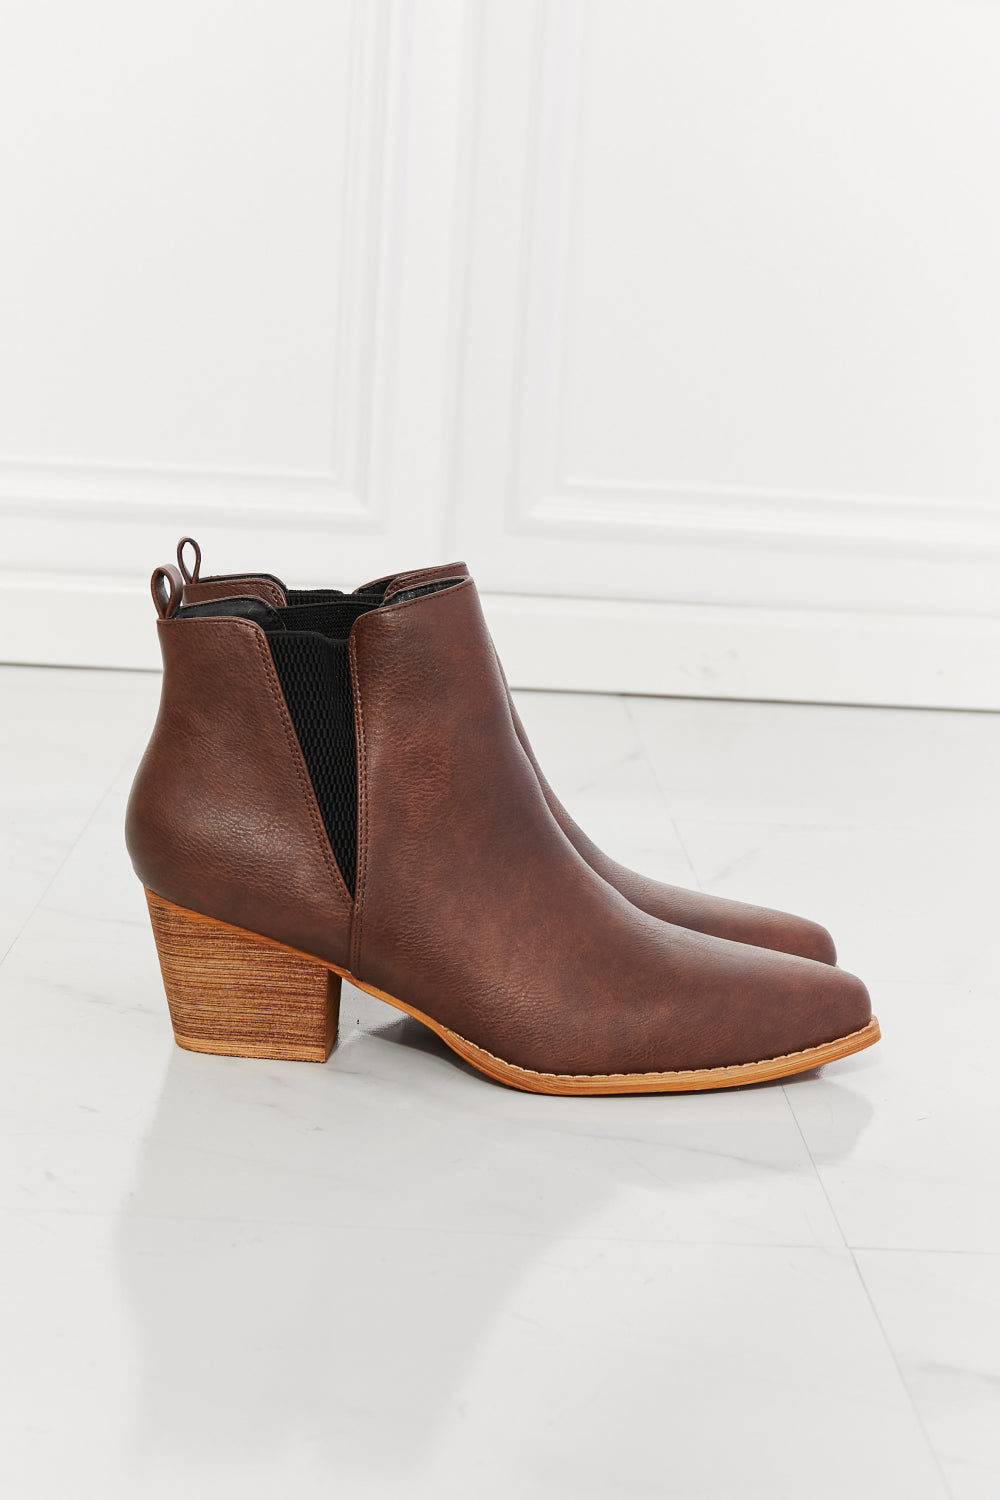 MMShoes Back At It Point Toe Bootie in Chocolate - Tigbul's Fashion